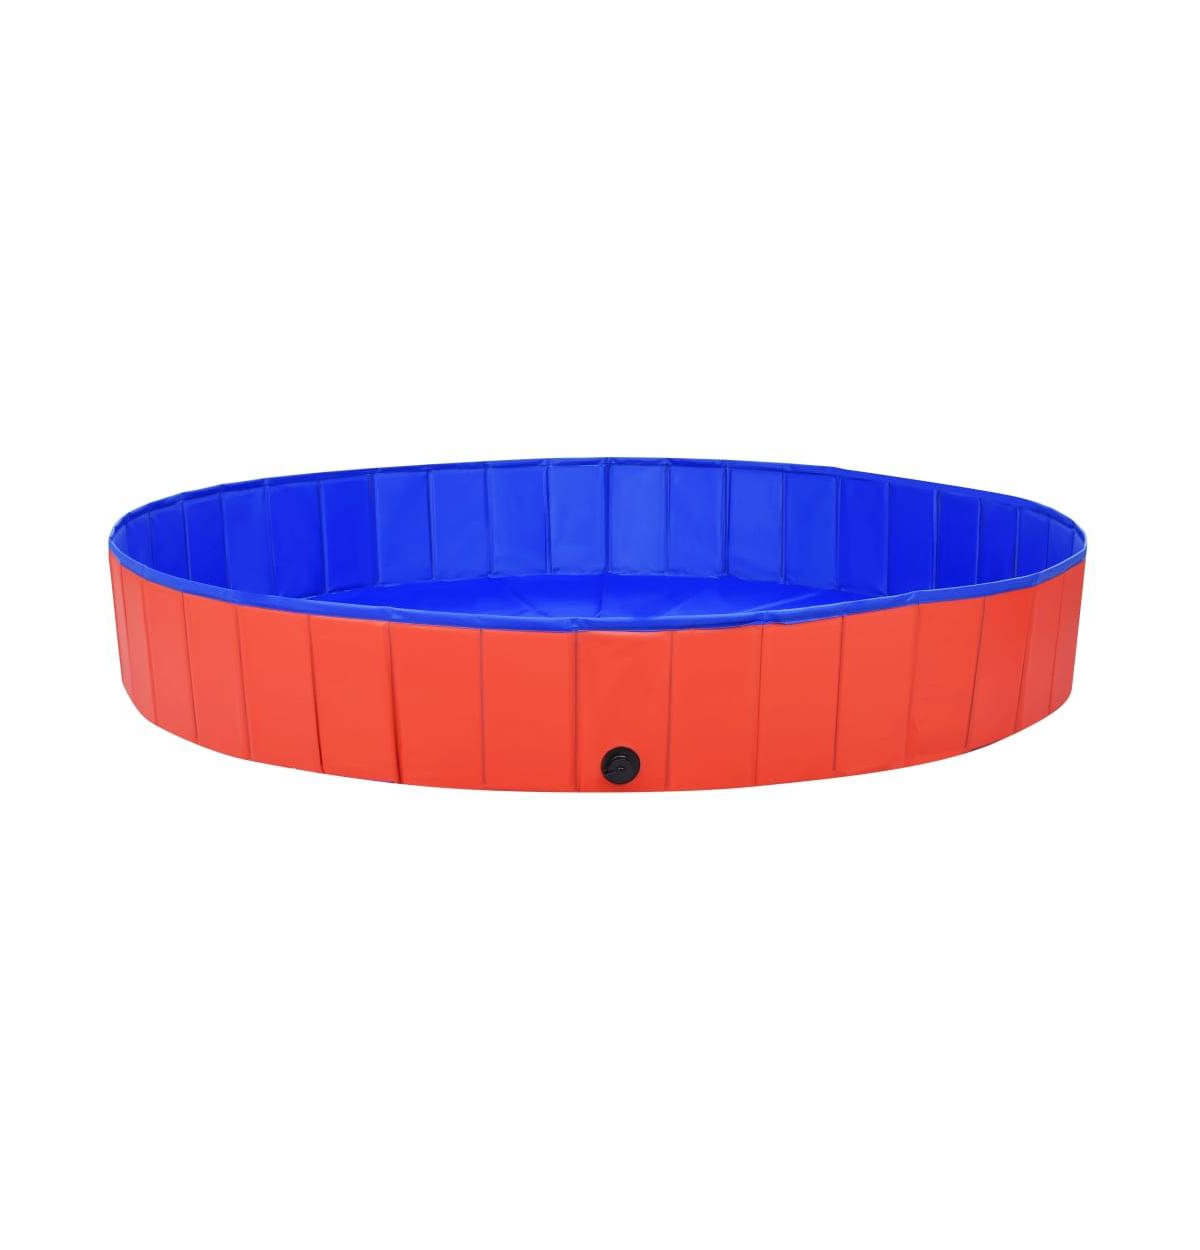 Foldable Dog Swimming Pool Red 78.7"x11.8" Pvc - Red